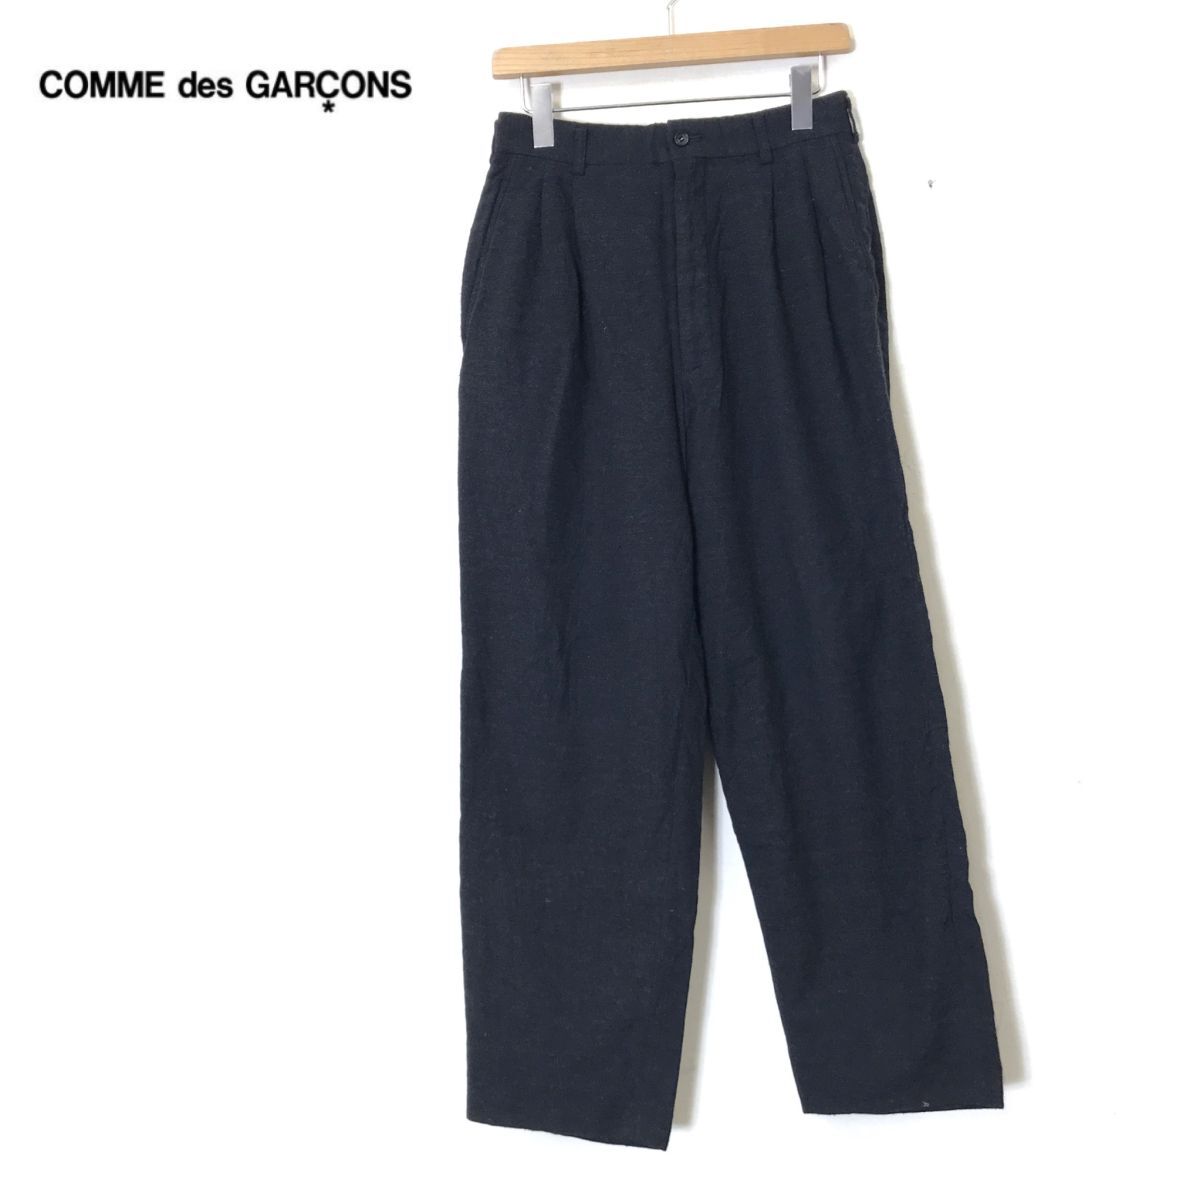 A1185-N◆old◆90s COMME des GARCONS HOMME コムデギャルソン オム スラックス 2タック ワイド ◆sizeS グレー系 ウールの画像1